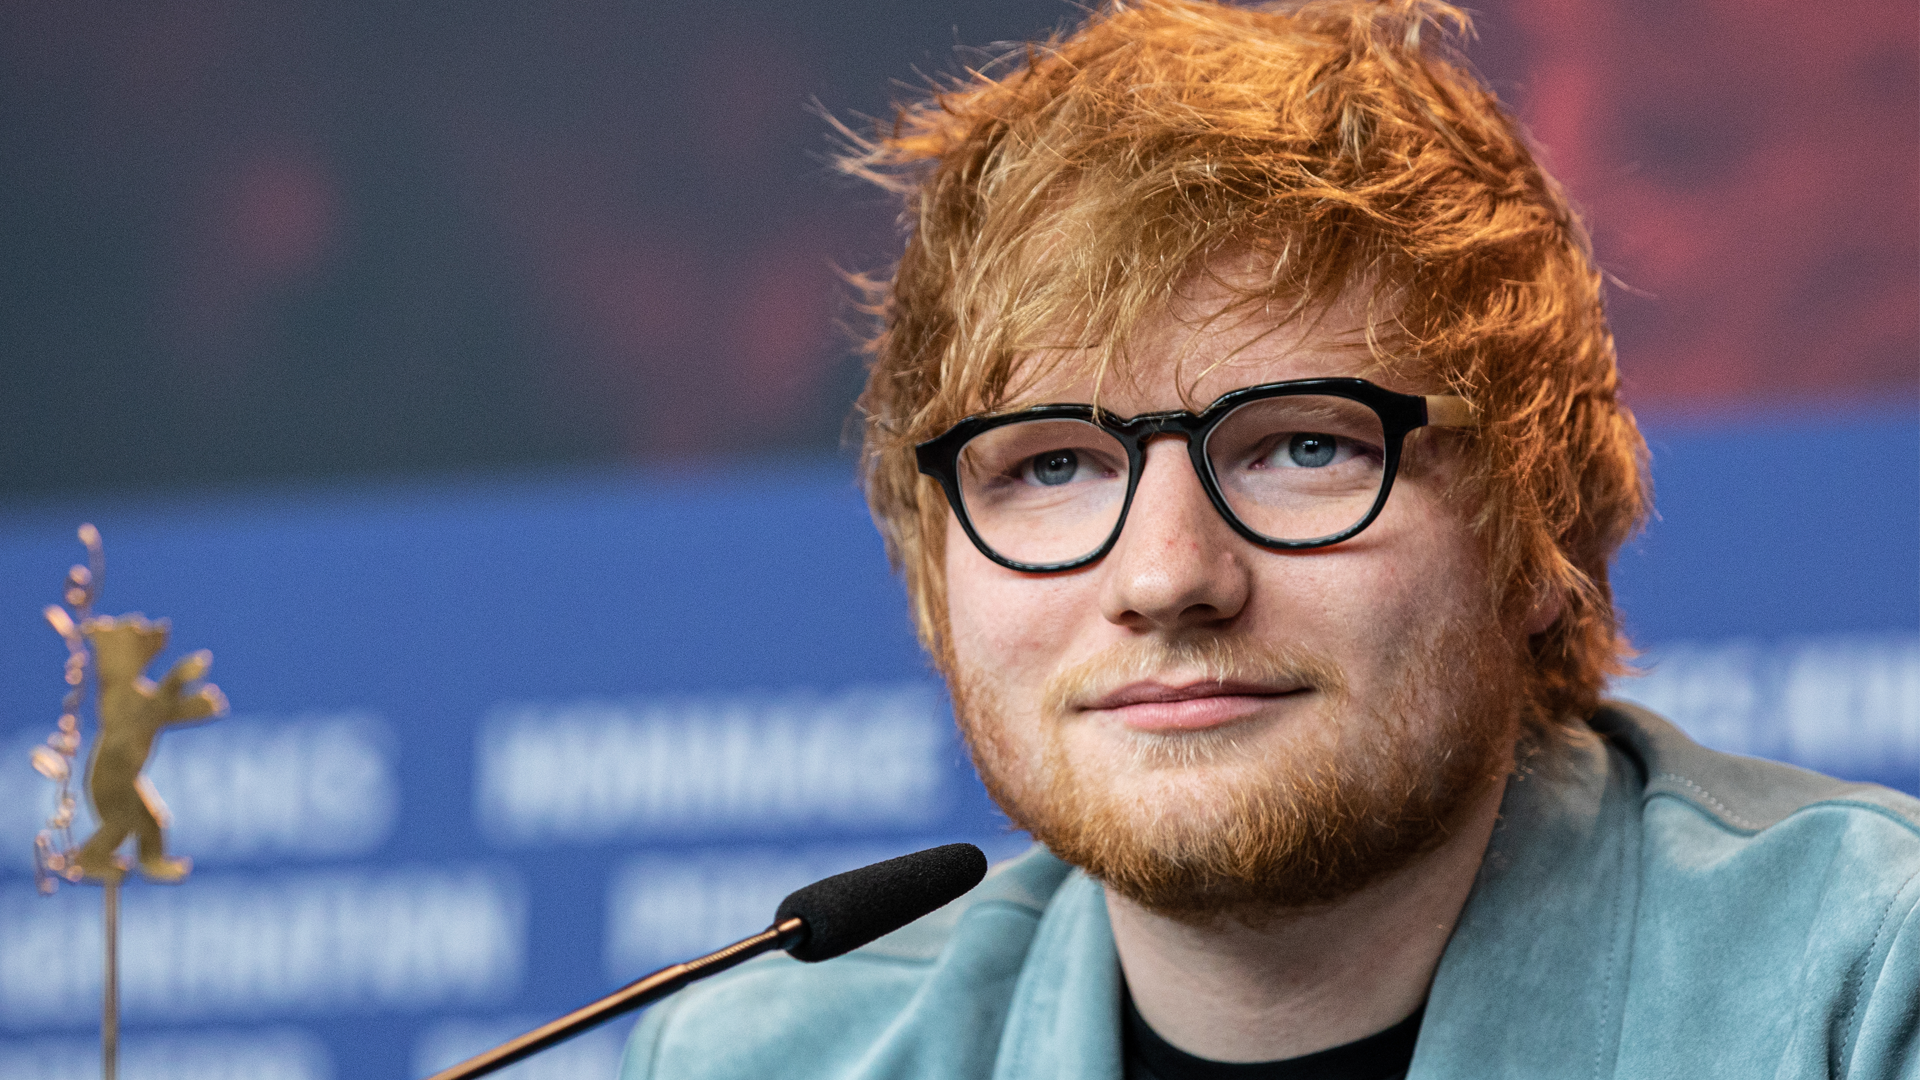 Ed Sheeran wins lawsuit against Marvin Gaye’s heirs for copyright